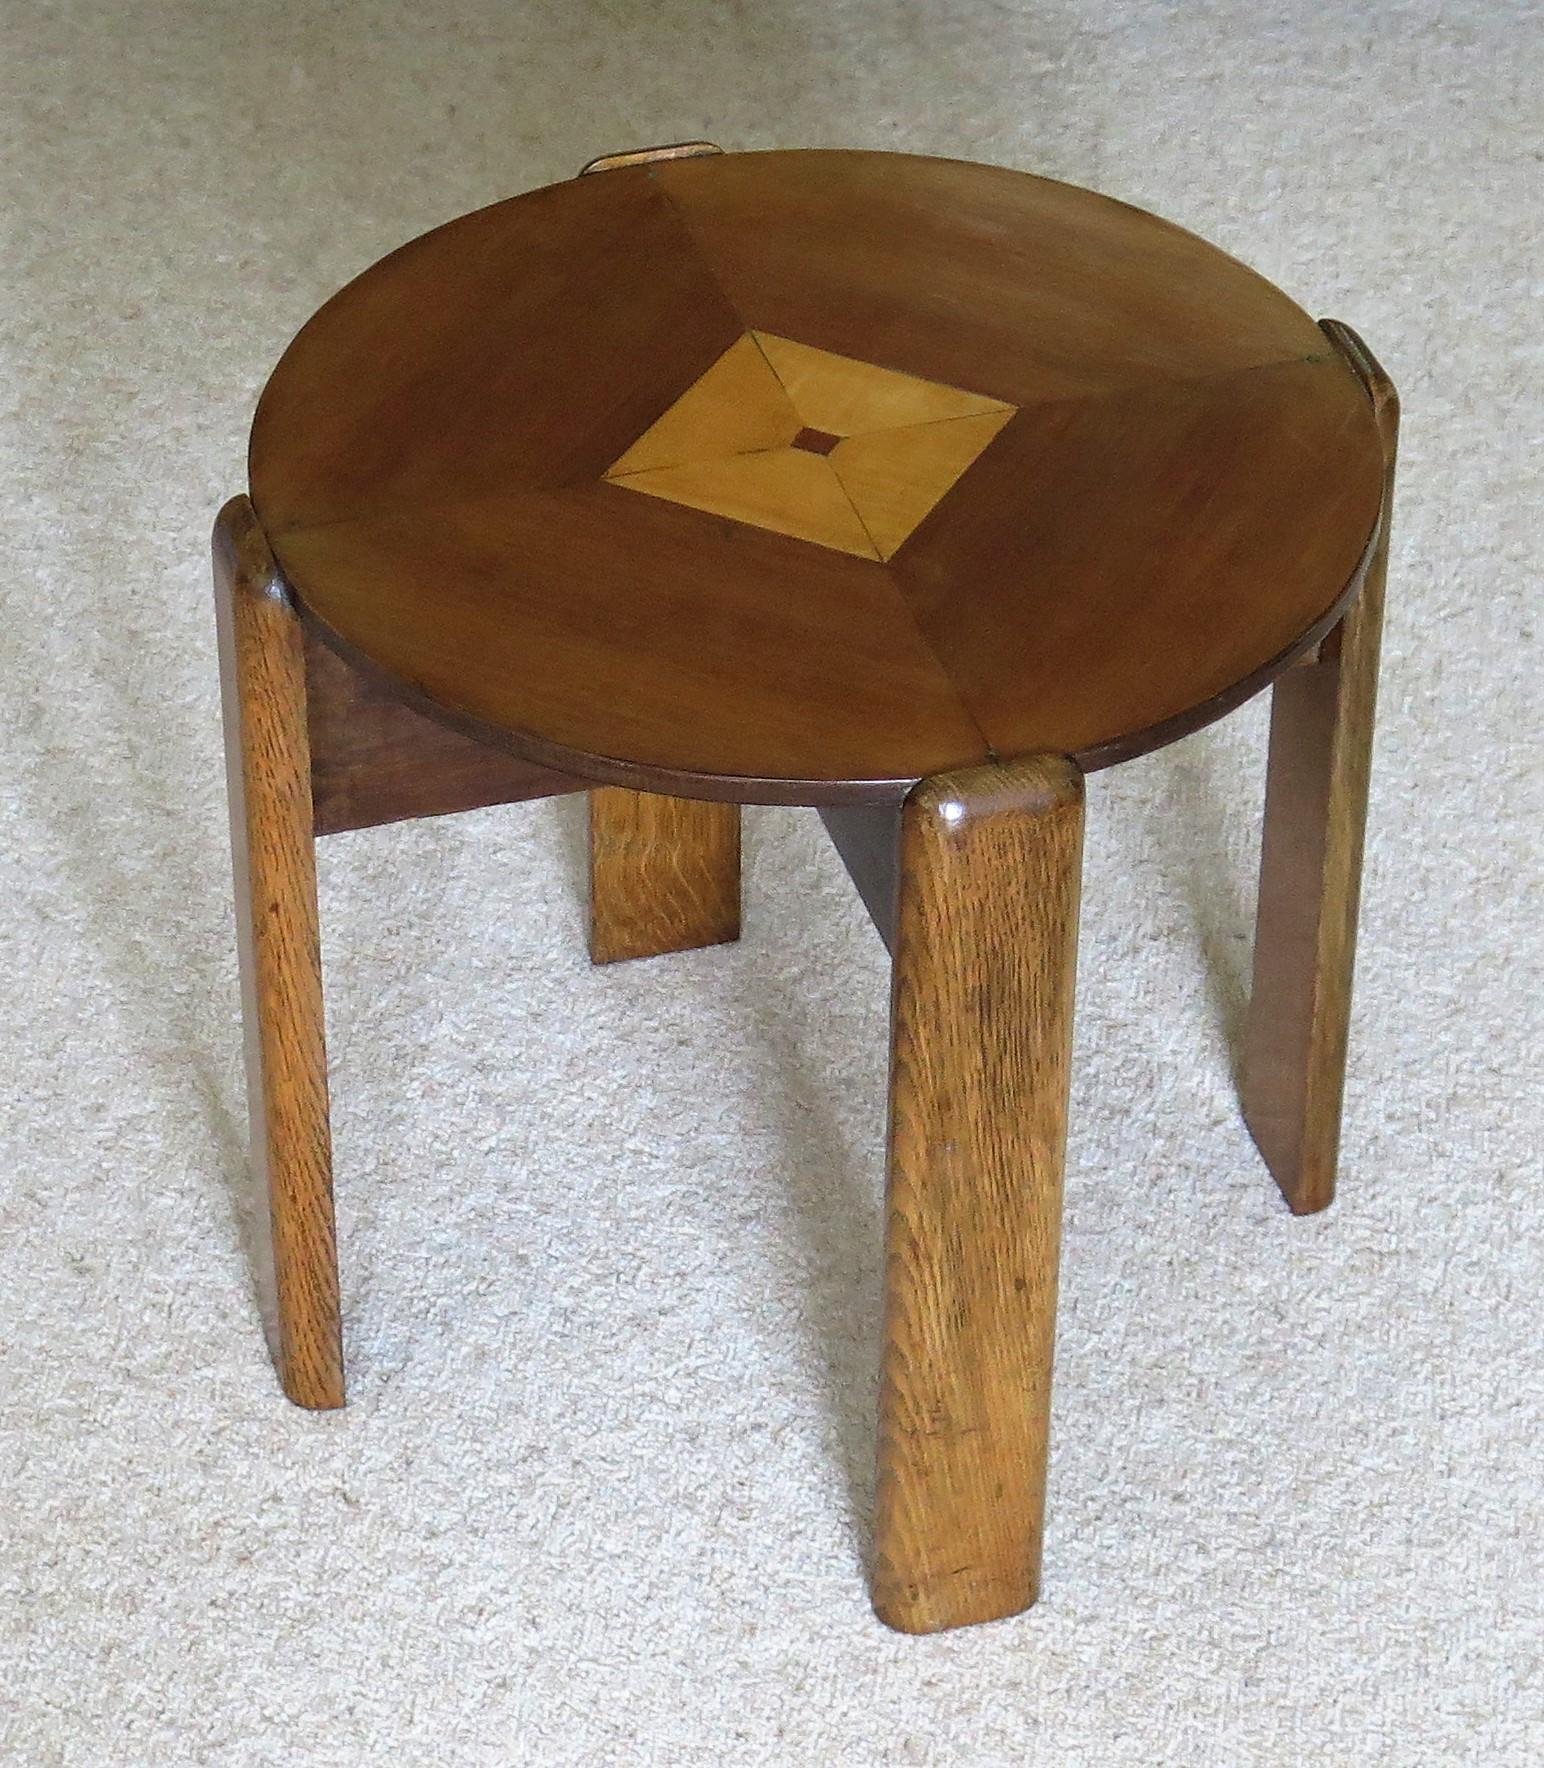 This is a very decorative occasional, end or side table made from different hardwoods in a typical geometric design and dating to the Art Deco period, circa 1930.

The table has a circular top sitting on an X-frame support with four shaped oak legs